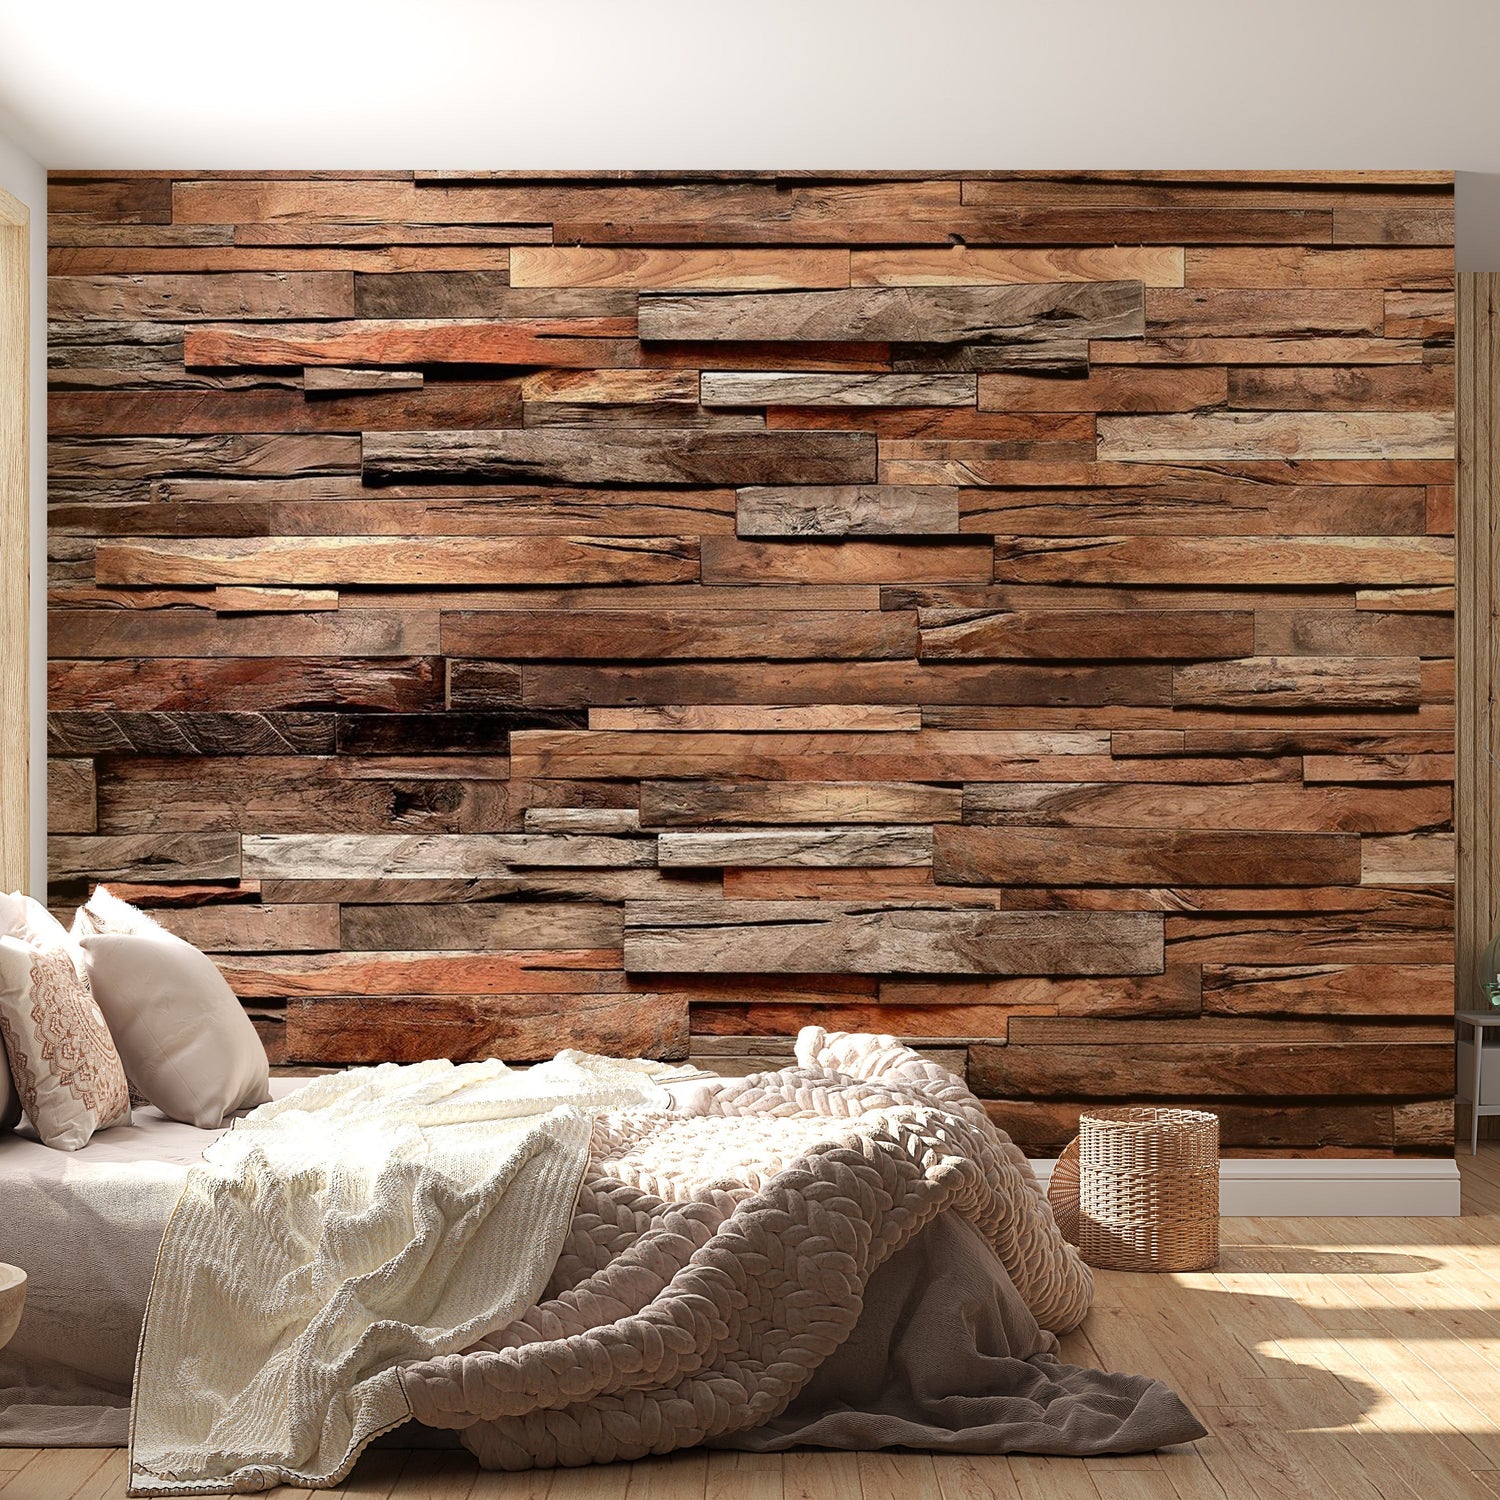 Peel & Stick Wall Mural - Red Wood Barn Wall - Removable Wall Decals